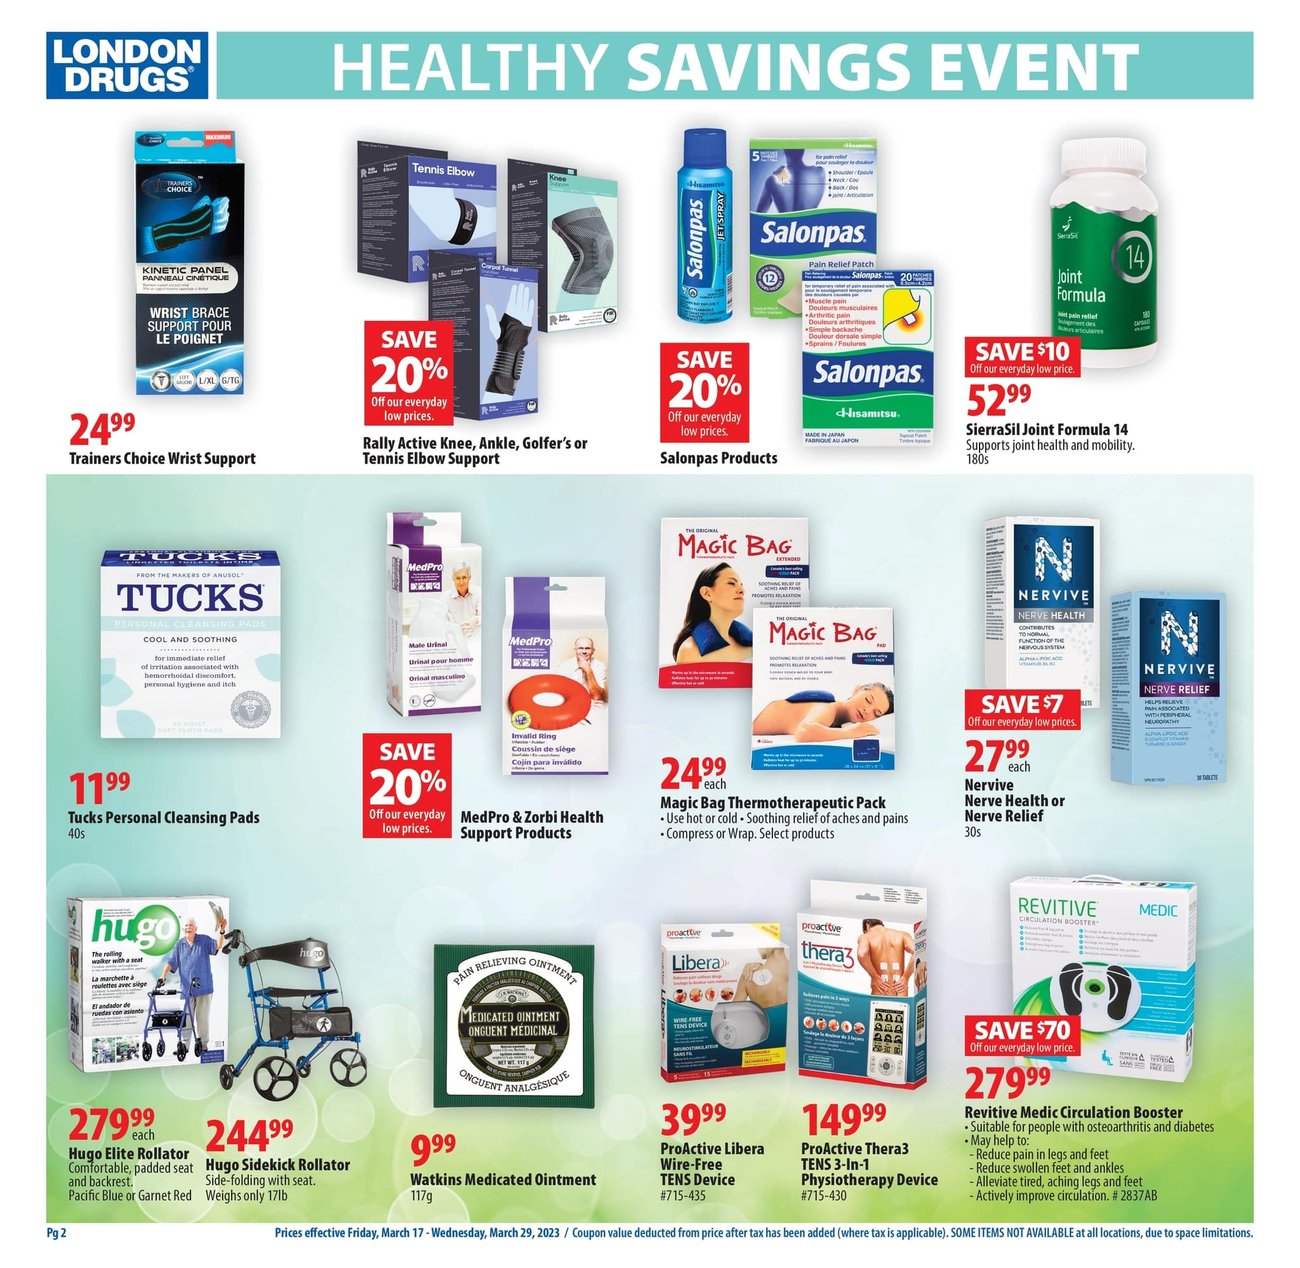 London Drugs - Healthy Savings Event - Page 2